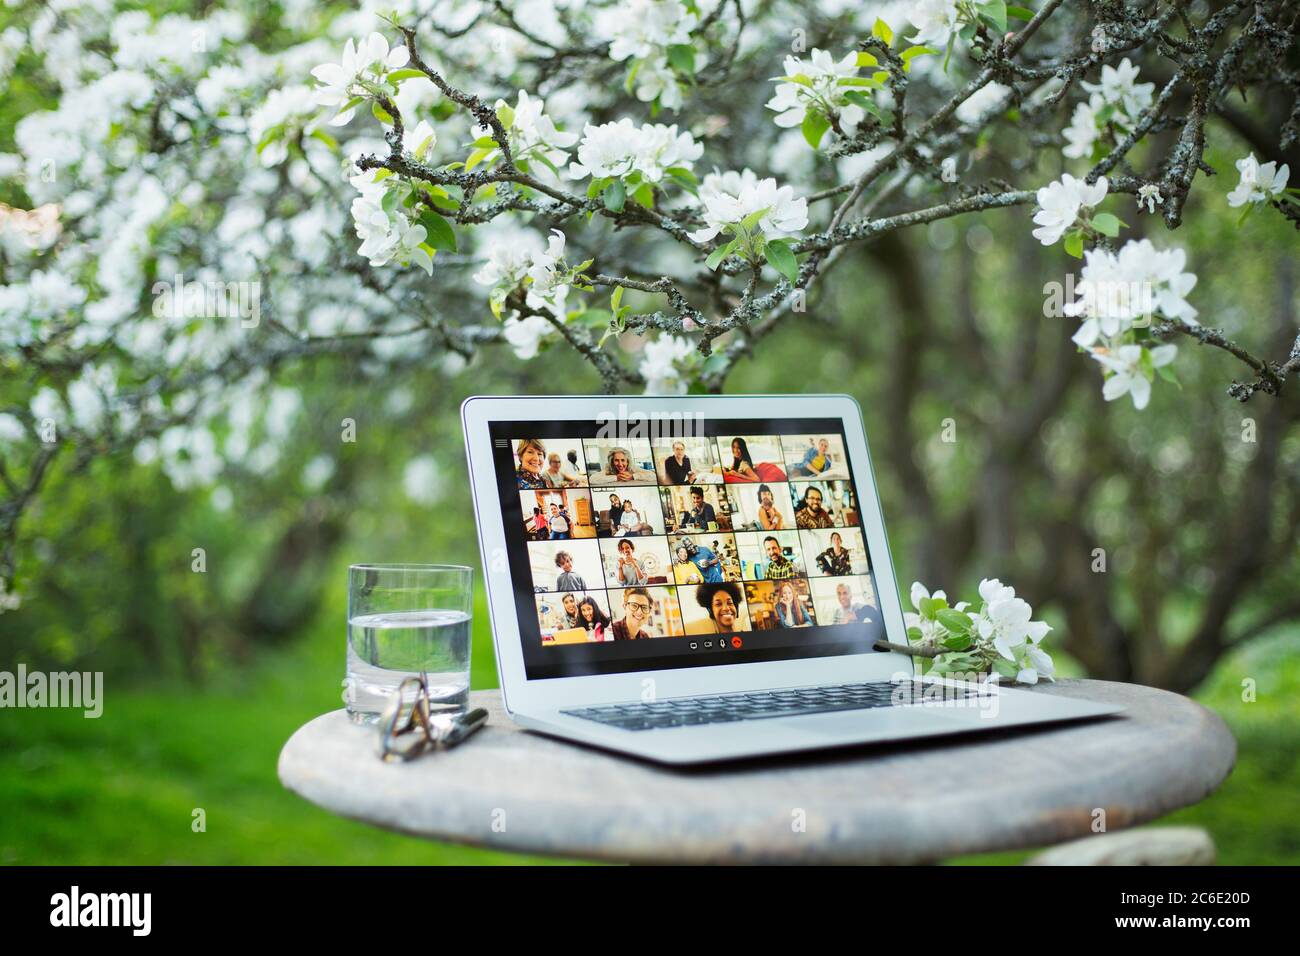 Video chat on screen in garden Stock Photo